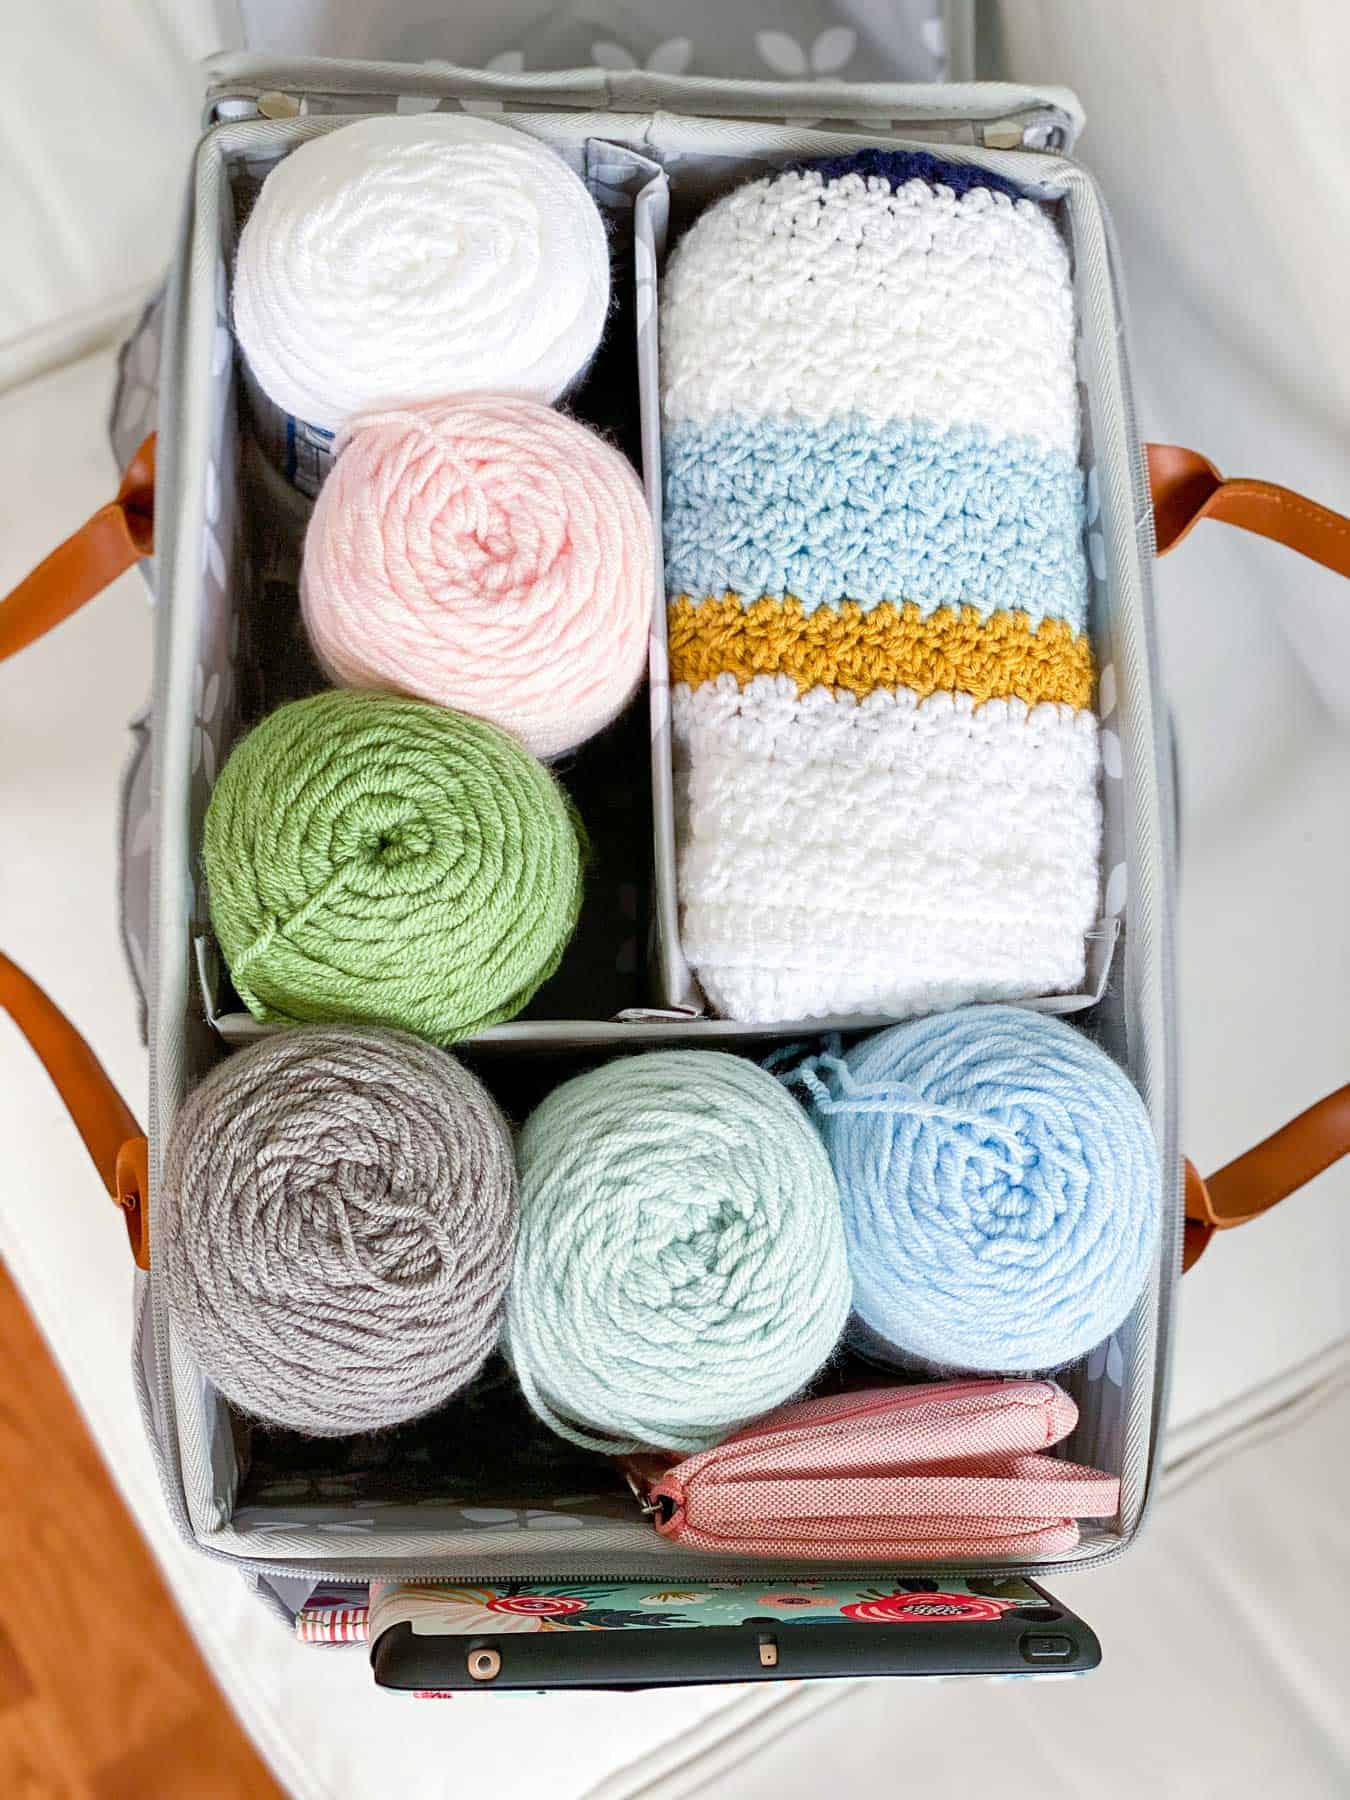 Crochet caddy with yarn and project